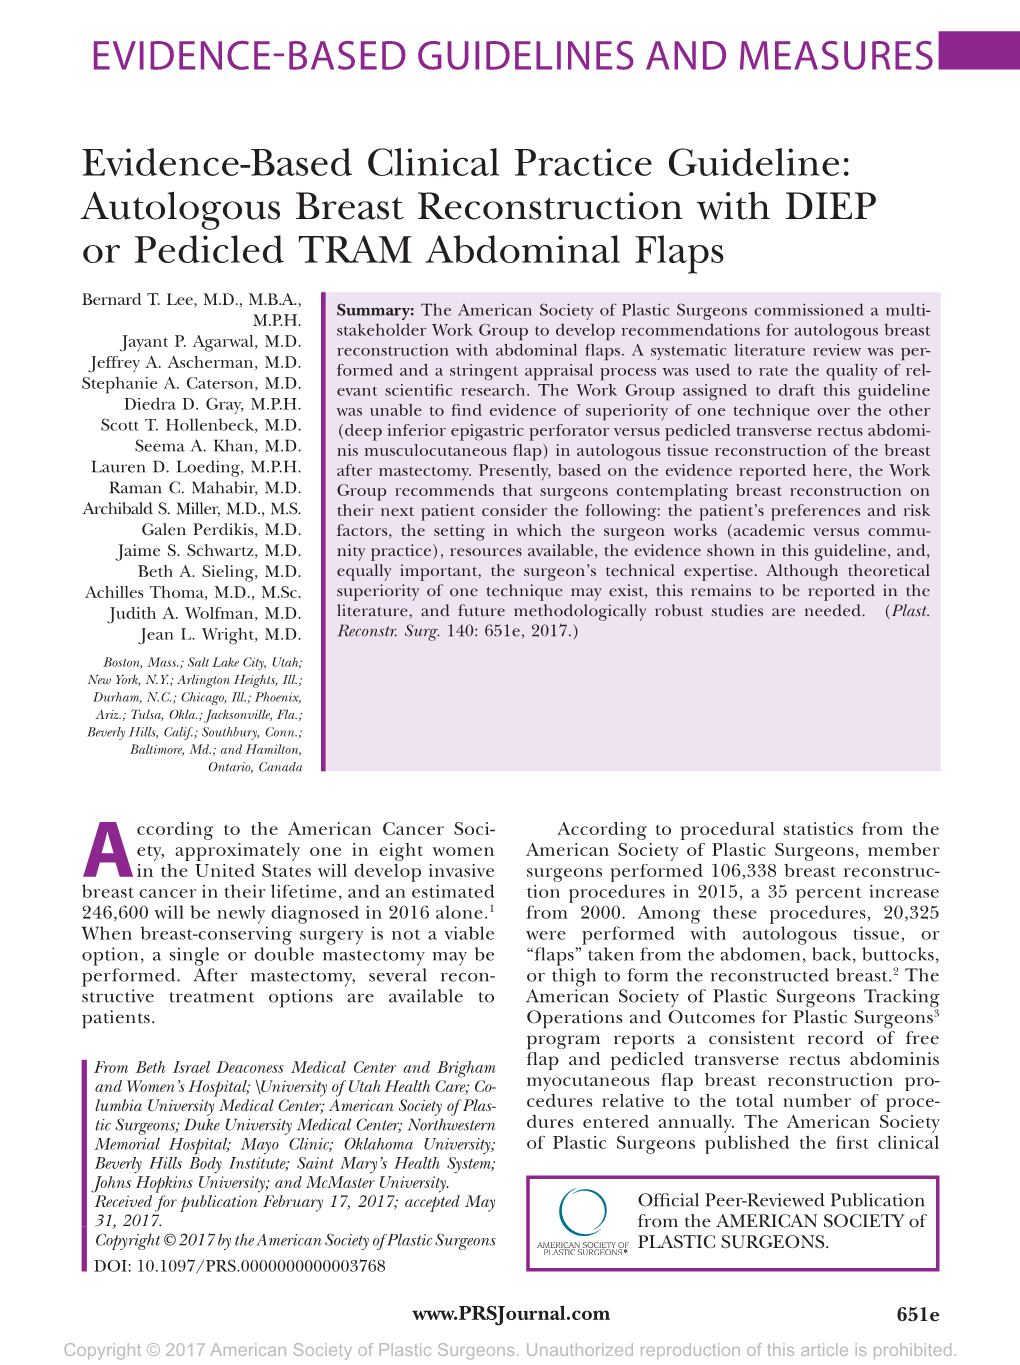 Autologous Breast Reconstruction with DIEP Or Pedicled TRAM Abdominal Flaps